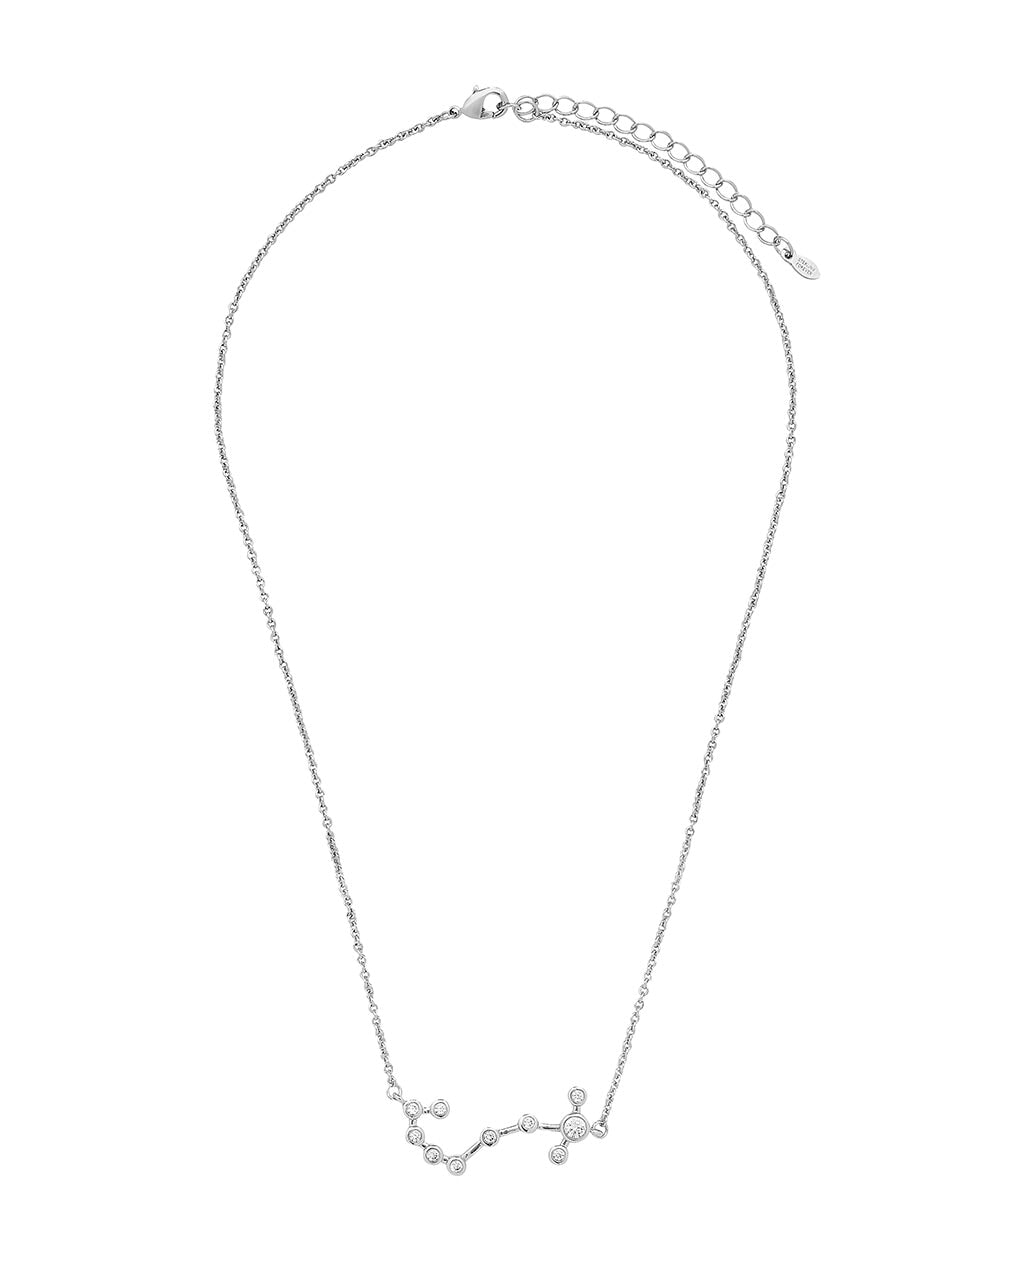 'When Stars Align' Constellation Necklace Necklace Sterling Forever 